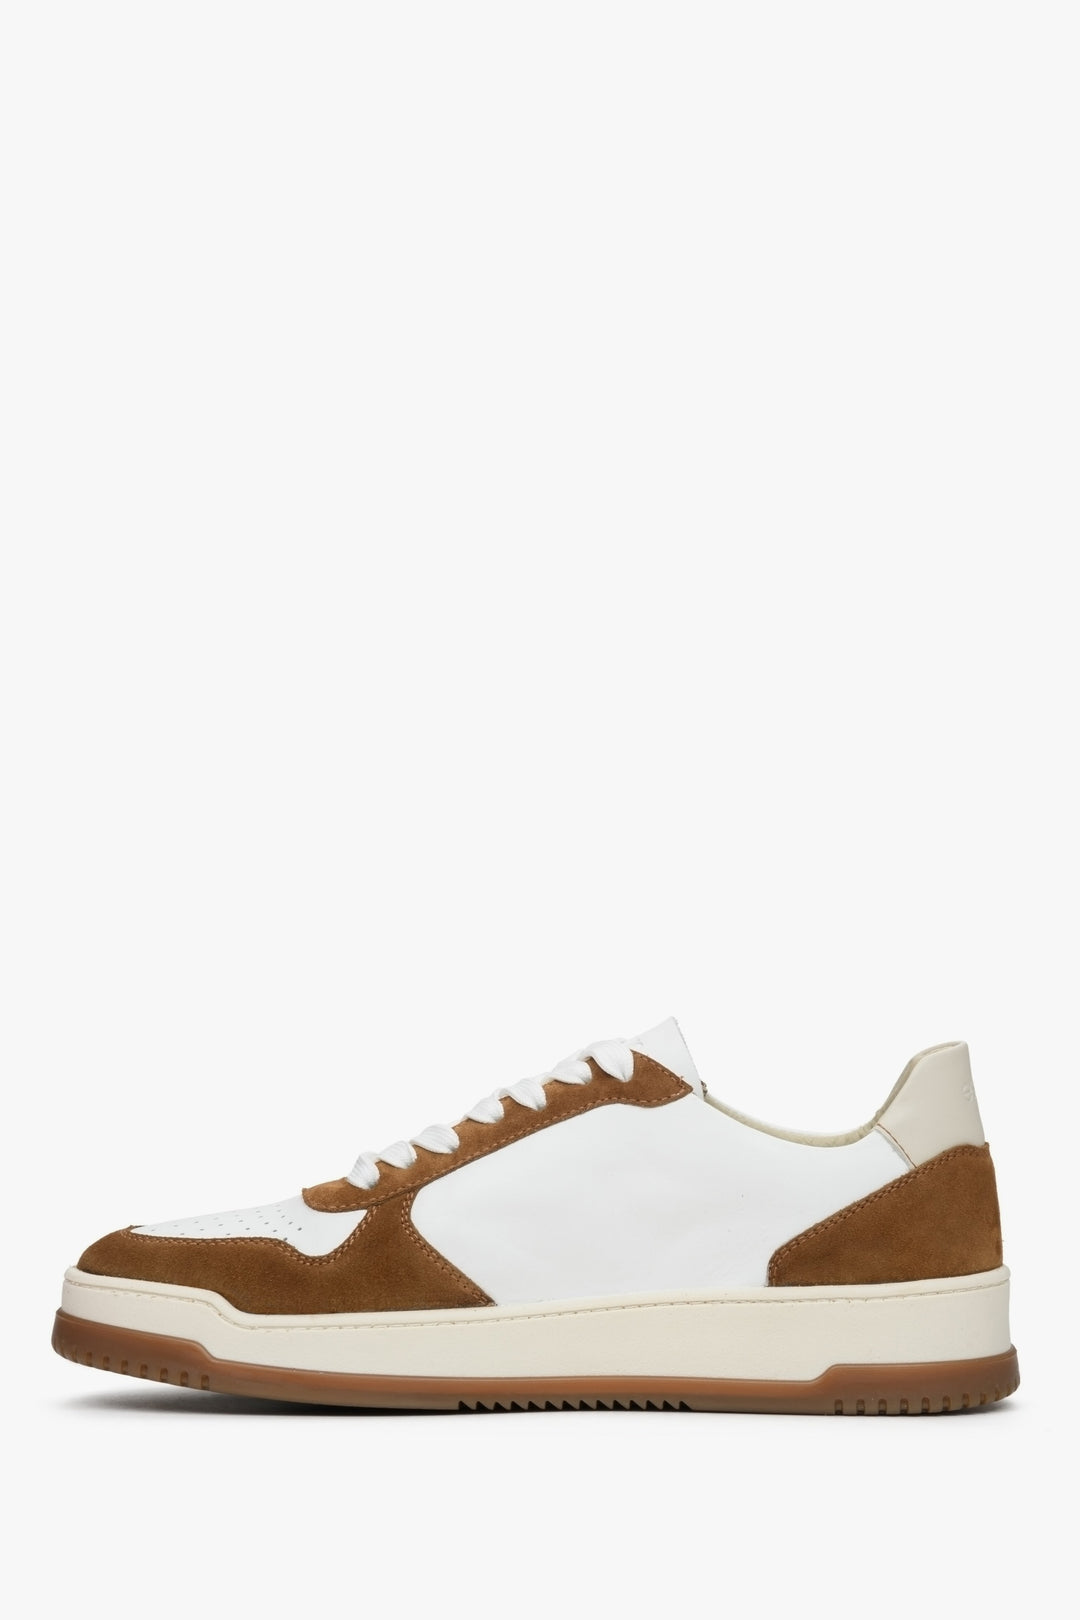 Men's white and brown suede and natural leather Estro sneakers - spring shoe profile.